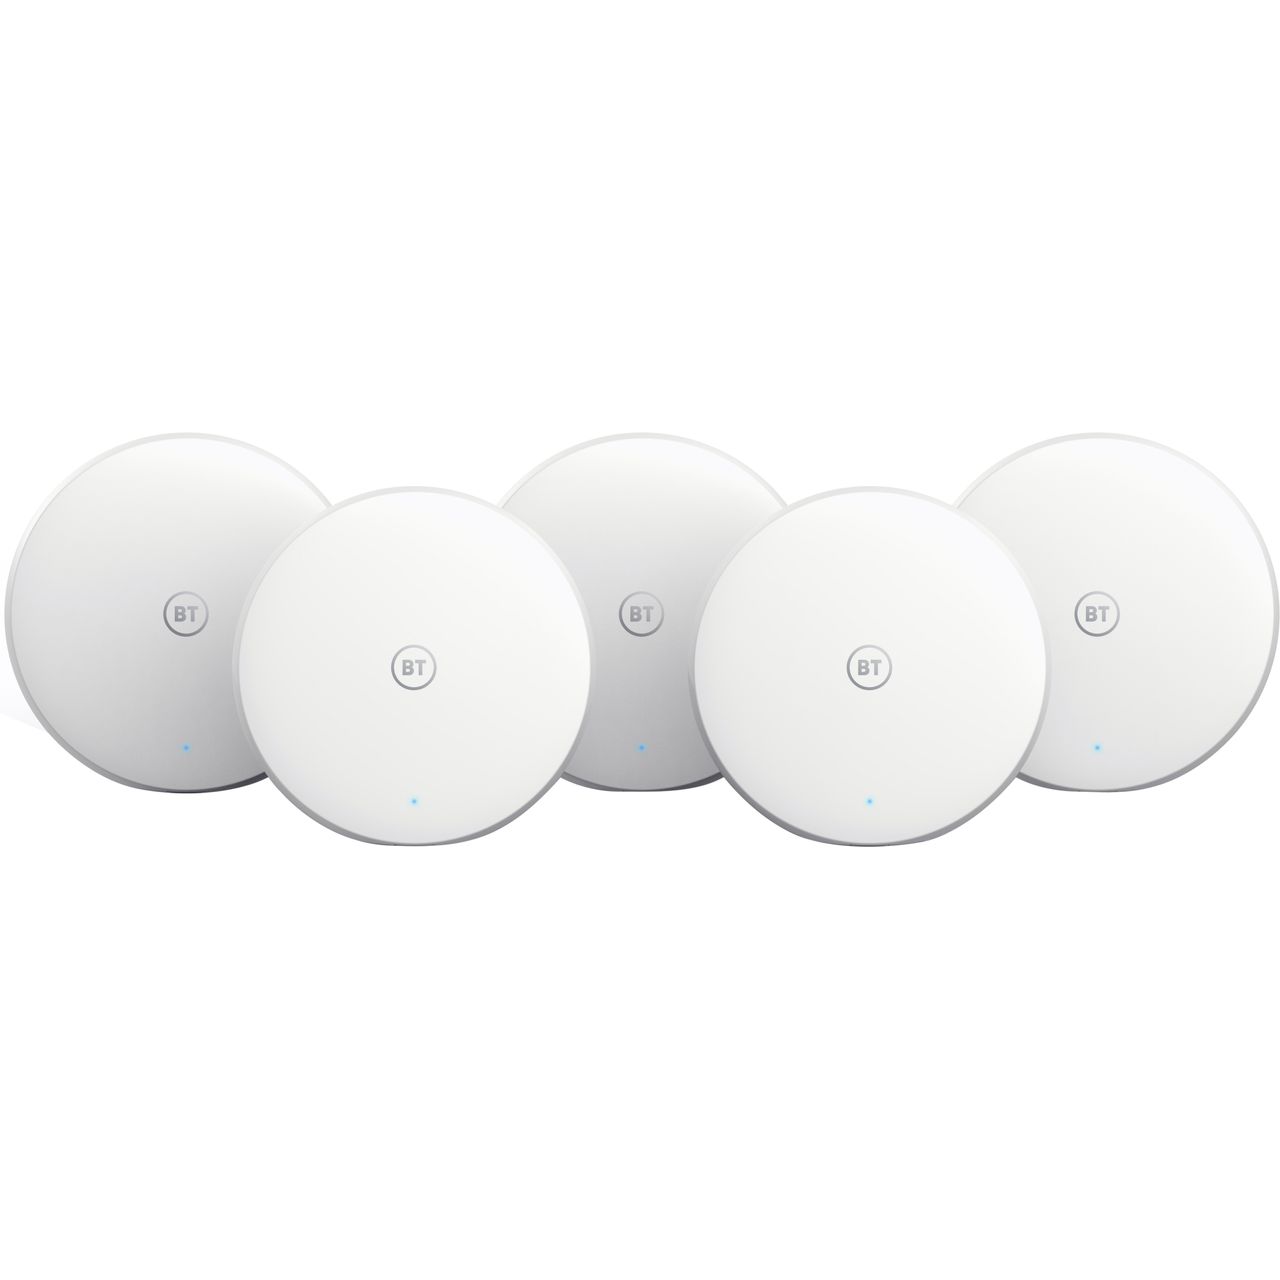 BT Mini Whole Home WiFi (5-Pack) for Mesh Network Review